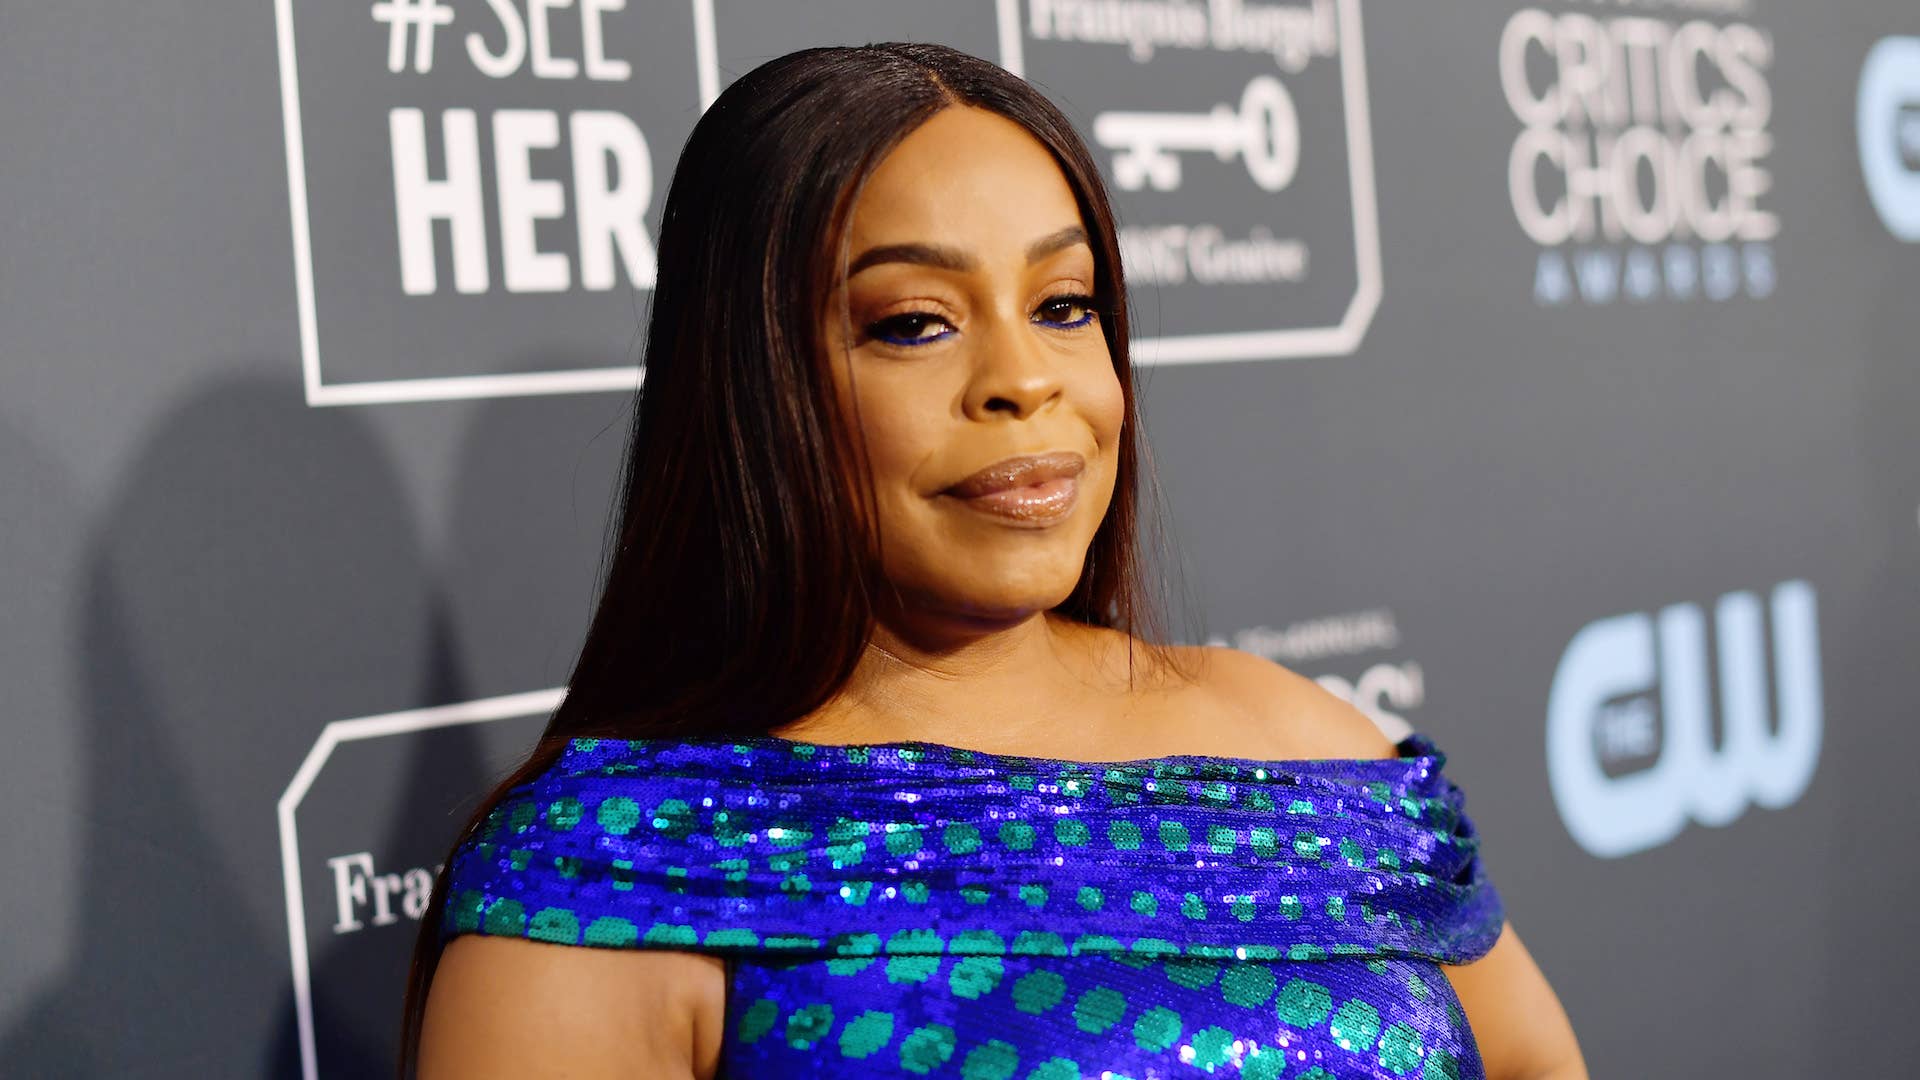 Niecy Nash attends the 25th Annual Critics' Choice Awards.